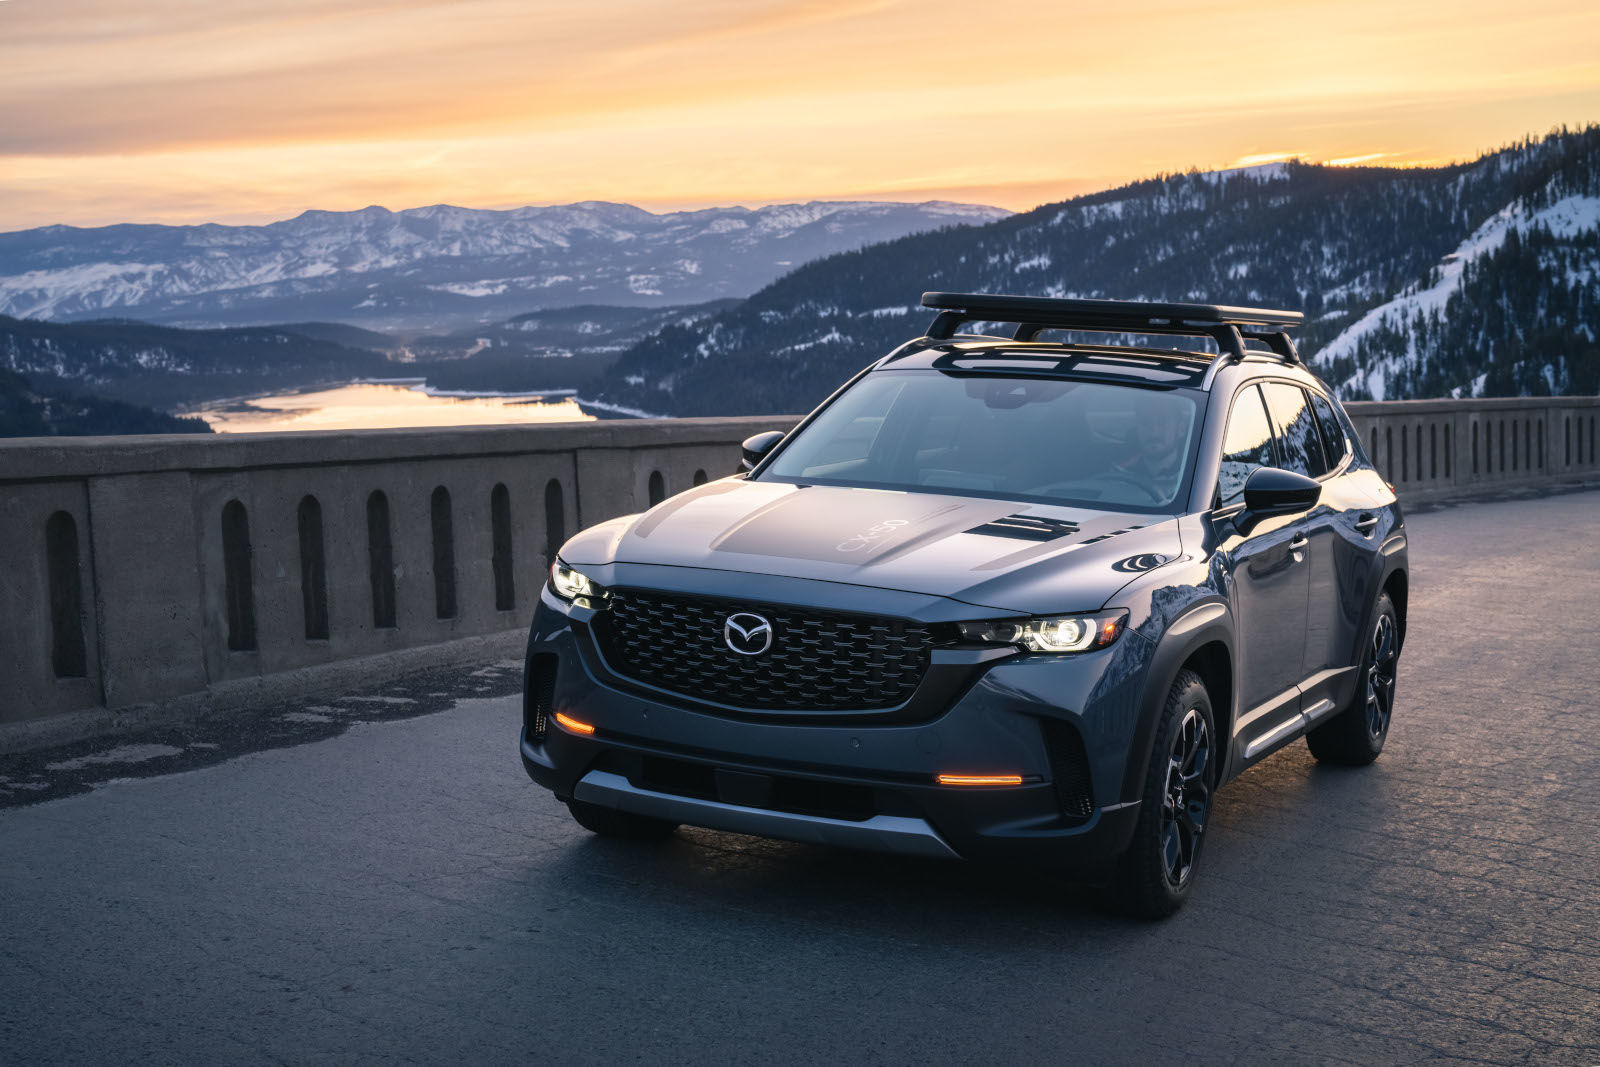 Mazda CX-50: A Practical Choice for Winter Driving